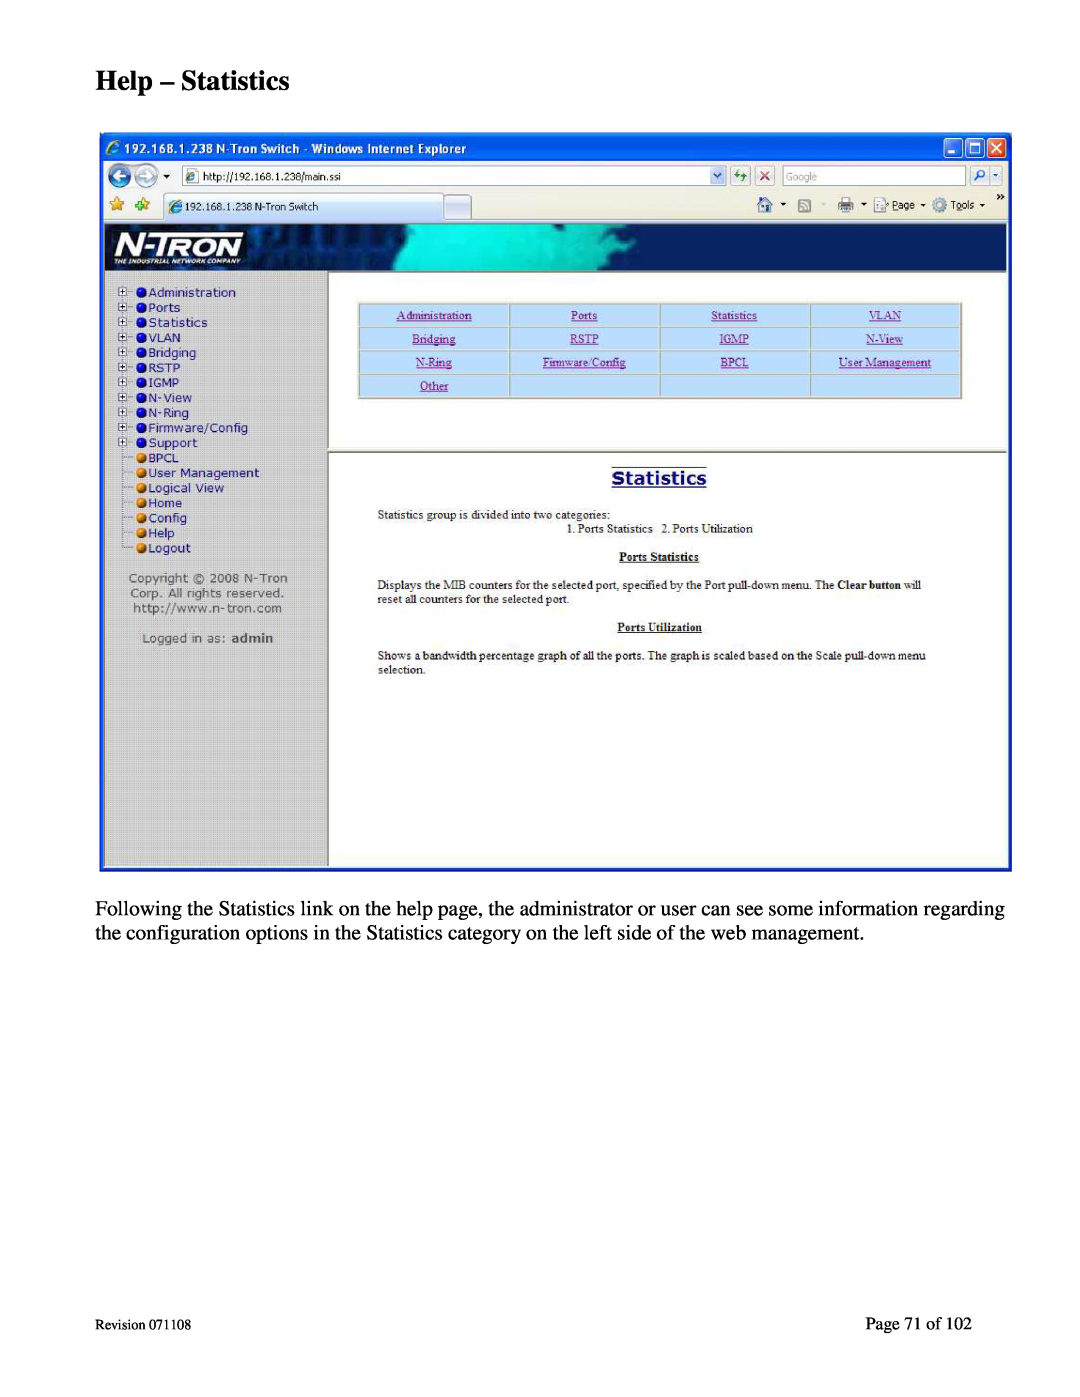 N-Tron 708M12 user manual Help - Statistics, Page 71 of, Revision 